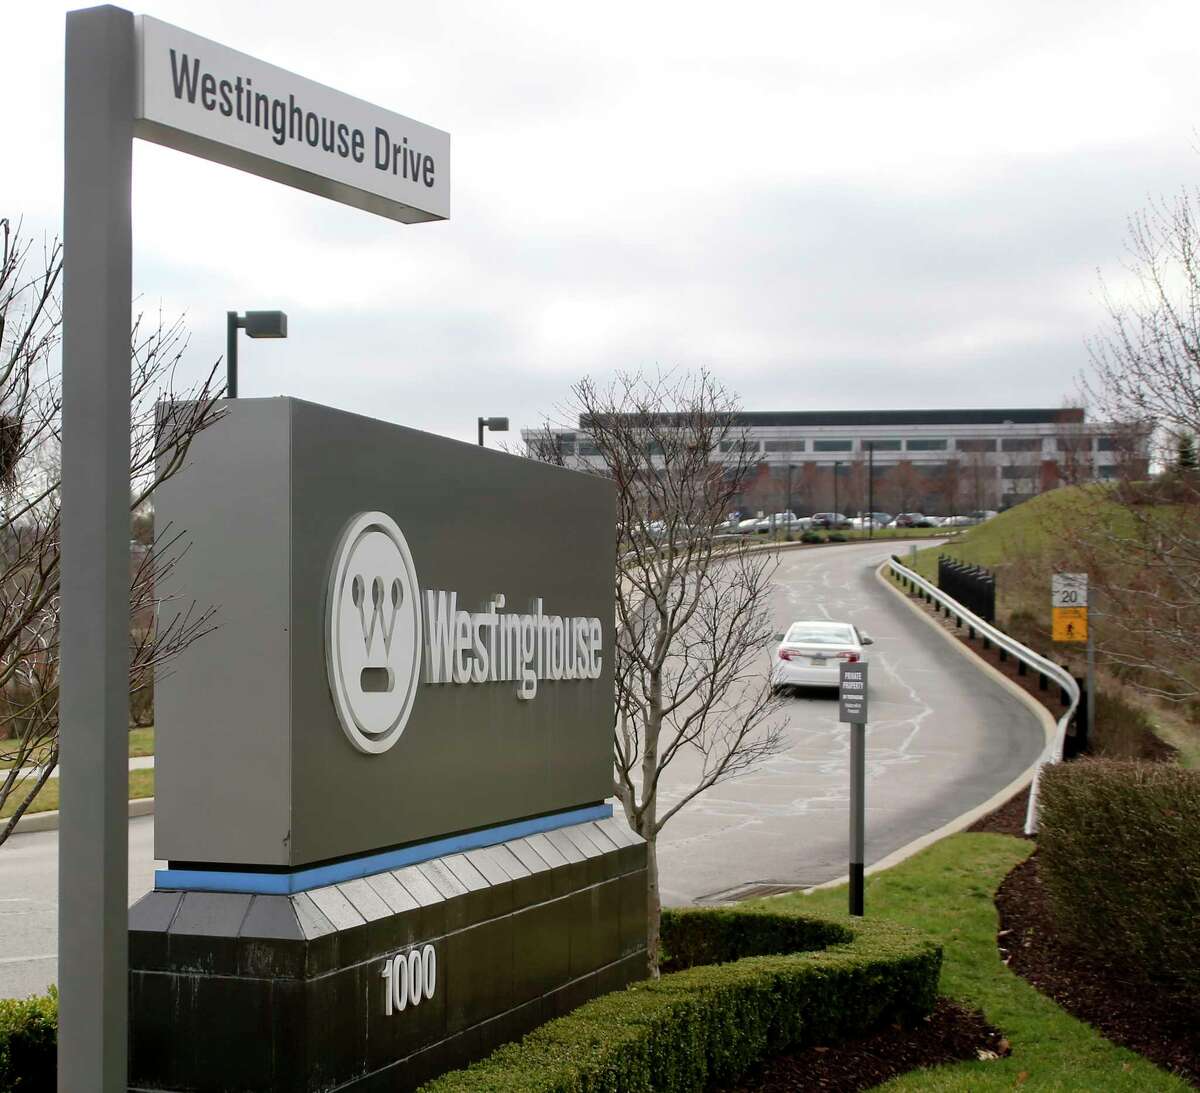 Vehicles move along the entrance to Westinghouse International Headquarters on Wednesday, March 29, 2017, in Cranberry, Pa., Butler county. Japan's embattled Toshiba Corp. says its U.S. nuclear unit Westinghouse Electric Co. has filed for bankruptcy protection, marking a key step in its struggles to stop the flow of massive red ink. (AP Photo/Keith Srakocic)